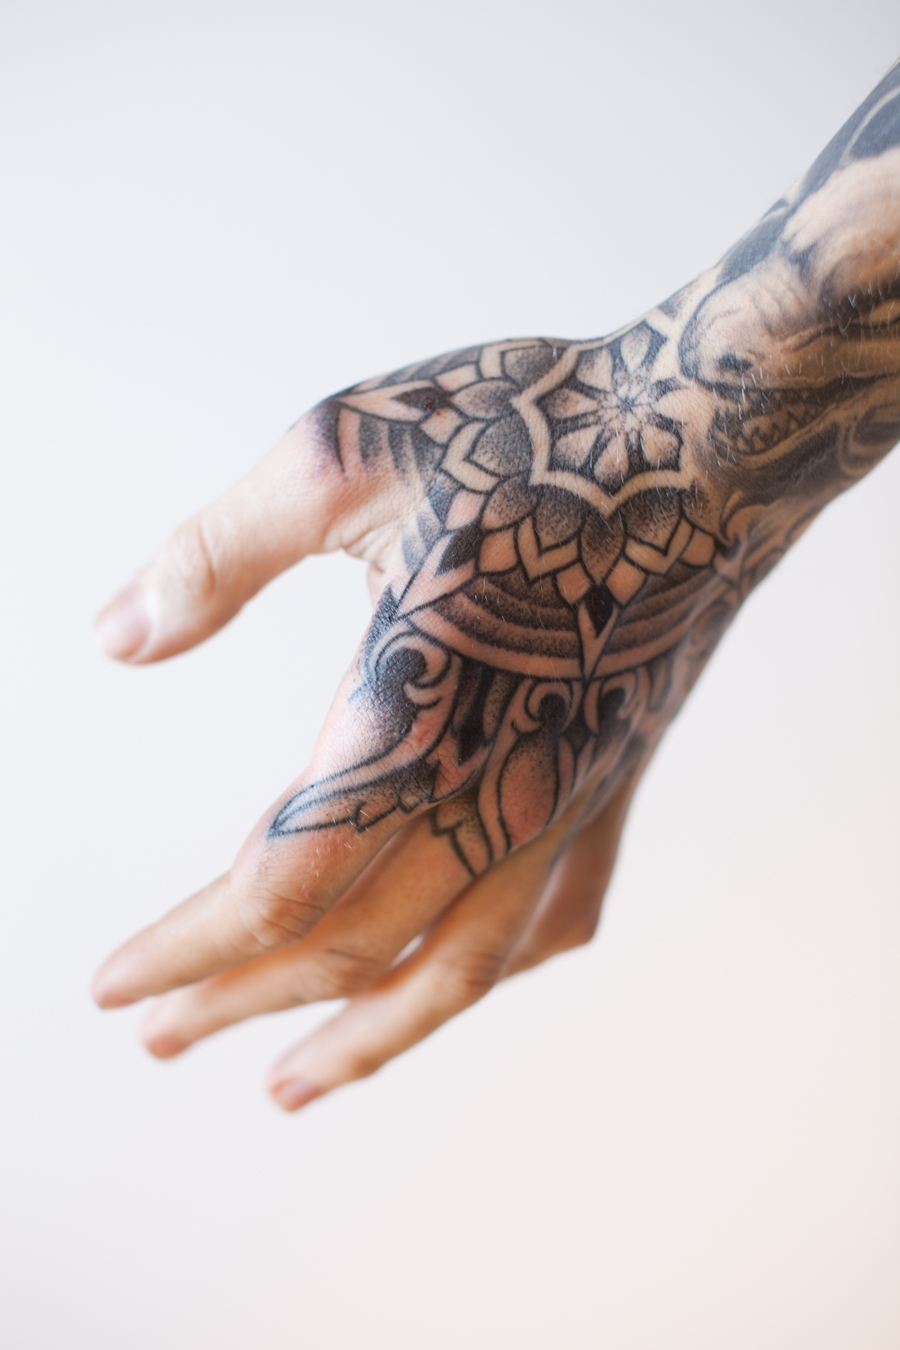 The Most Creative Tattoo Fonts